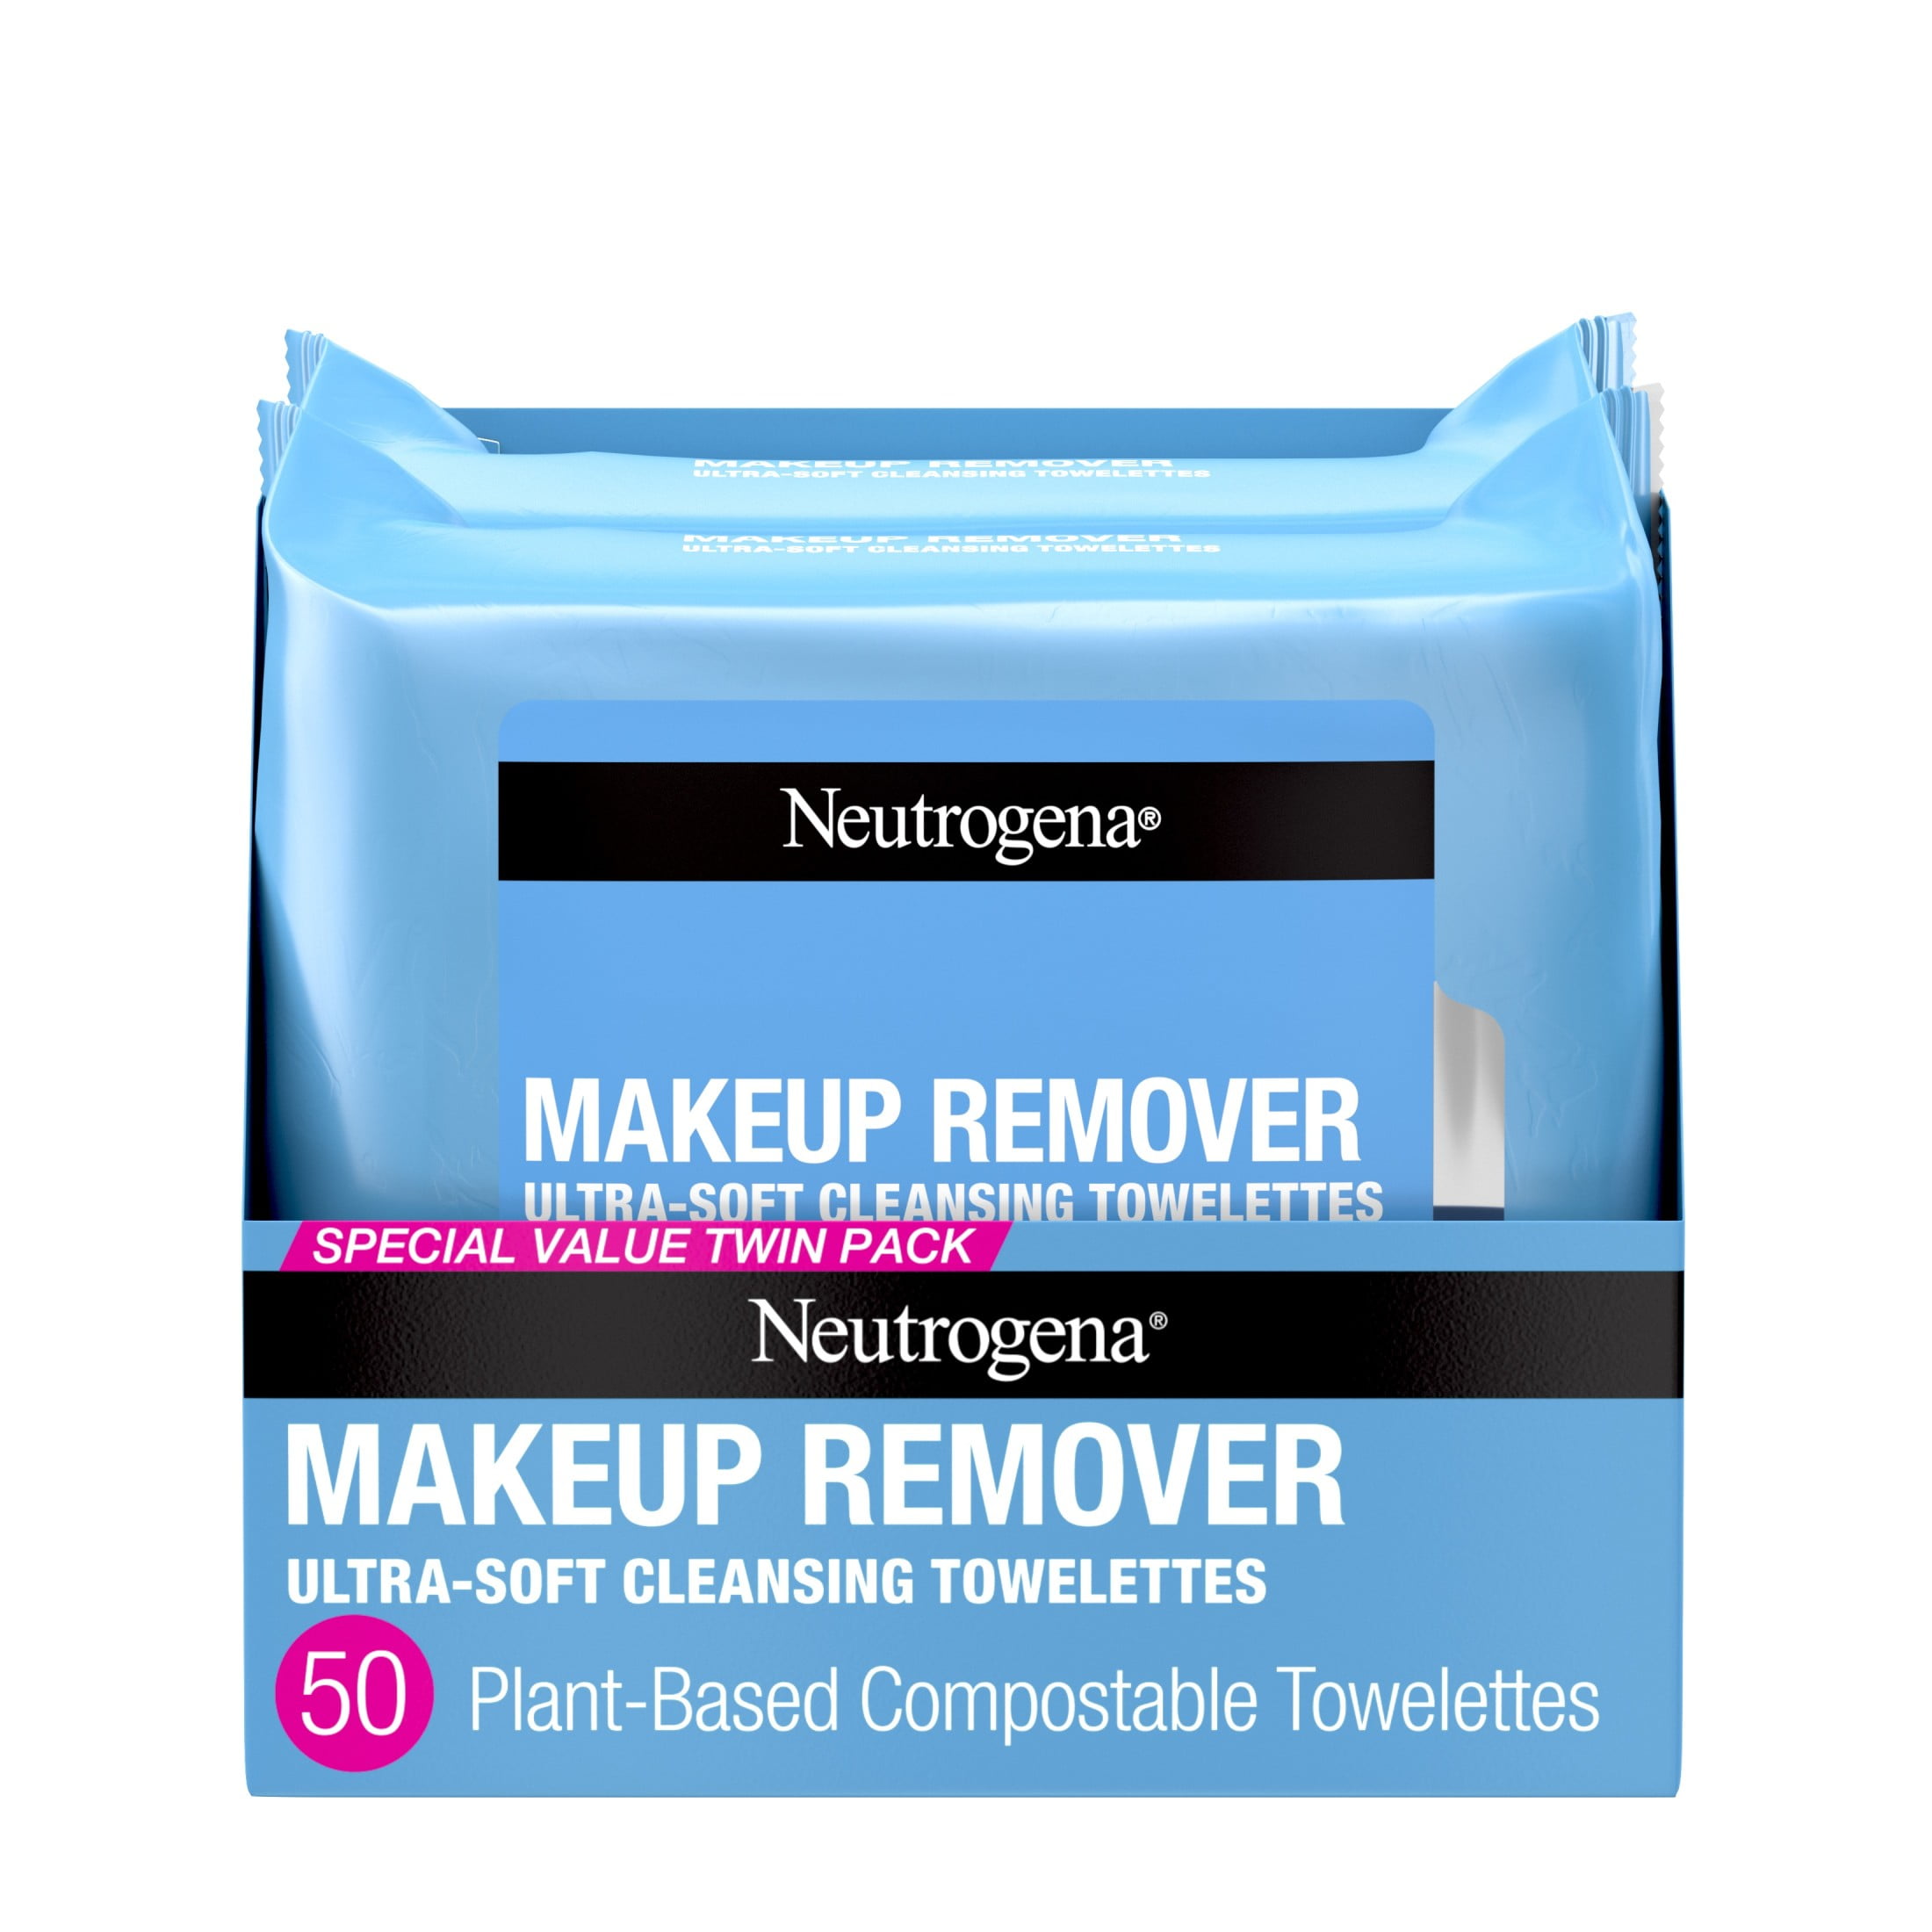 It's A Wrap! Waterproof Makeup Remover